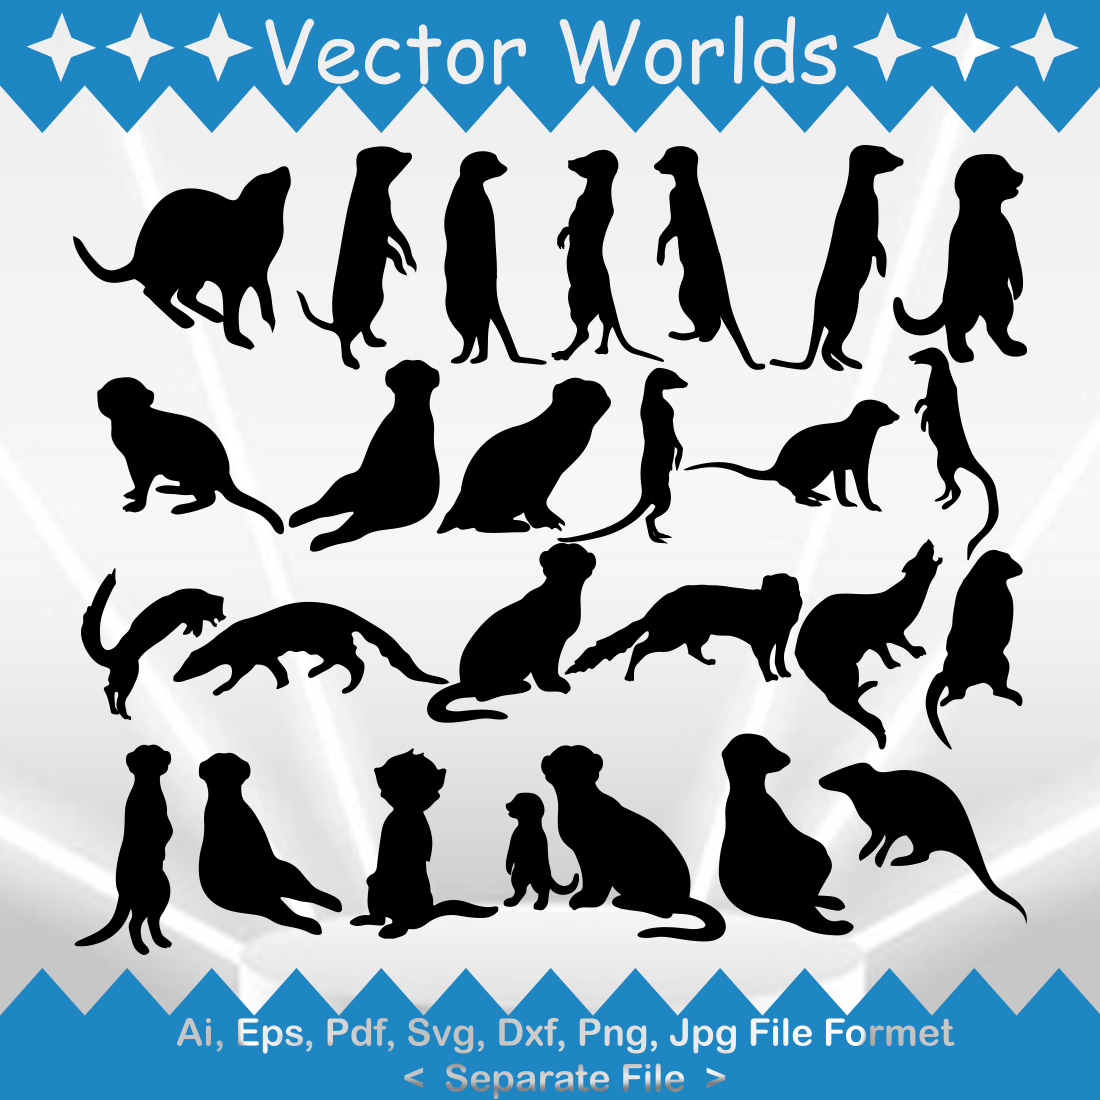 Set of silhouettes of dogs in different poses.